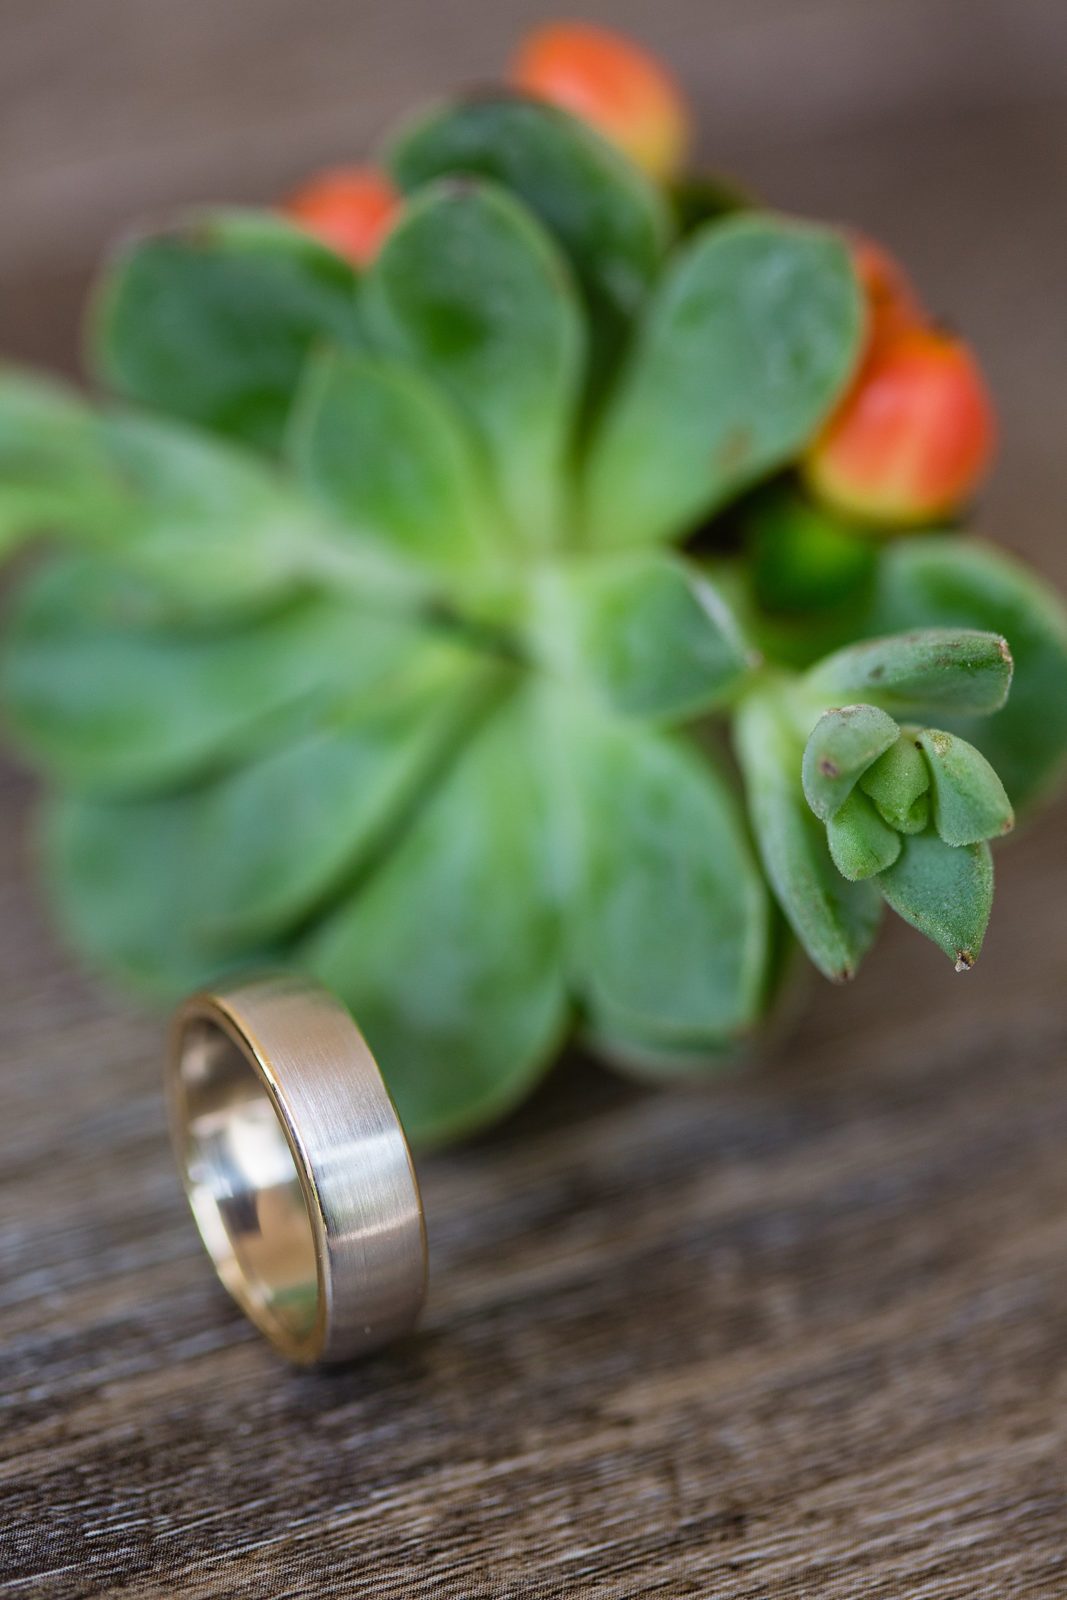 Men's unique white gold and yellow gold simple wedding band with succulent boutonniere by Scottsdale wedding photographer PMA Photography.